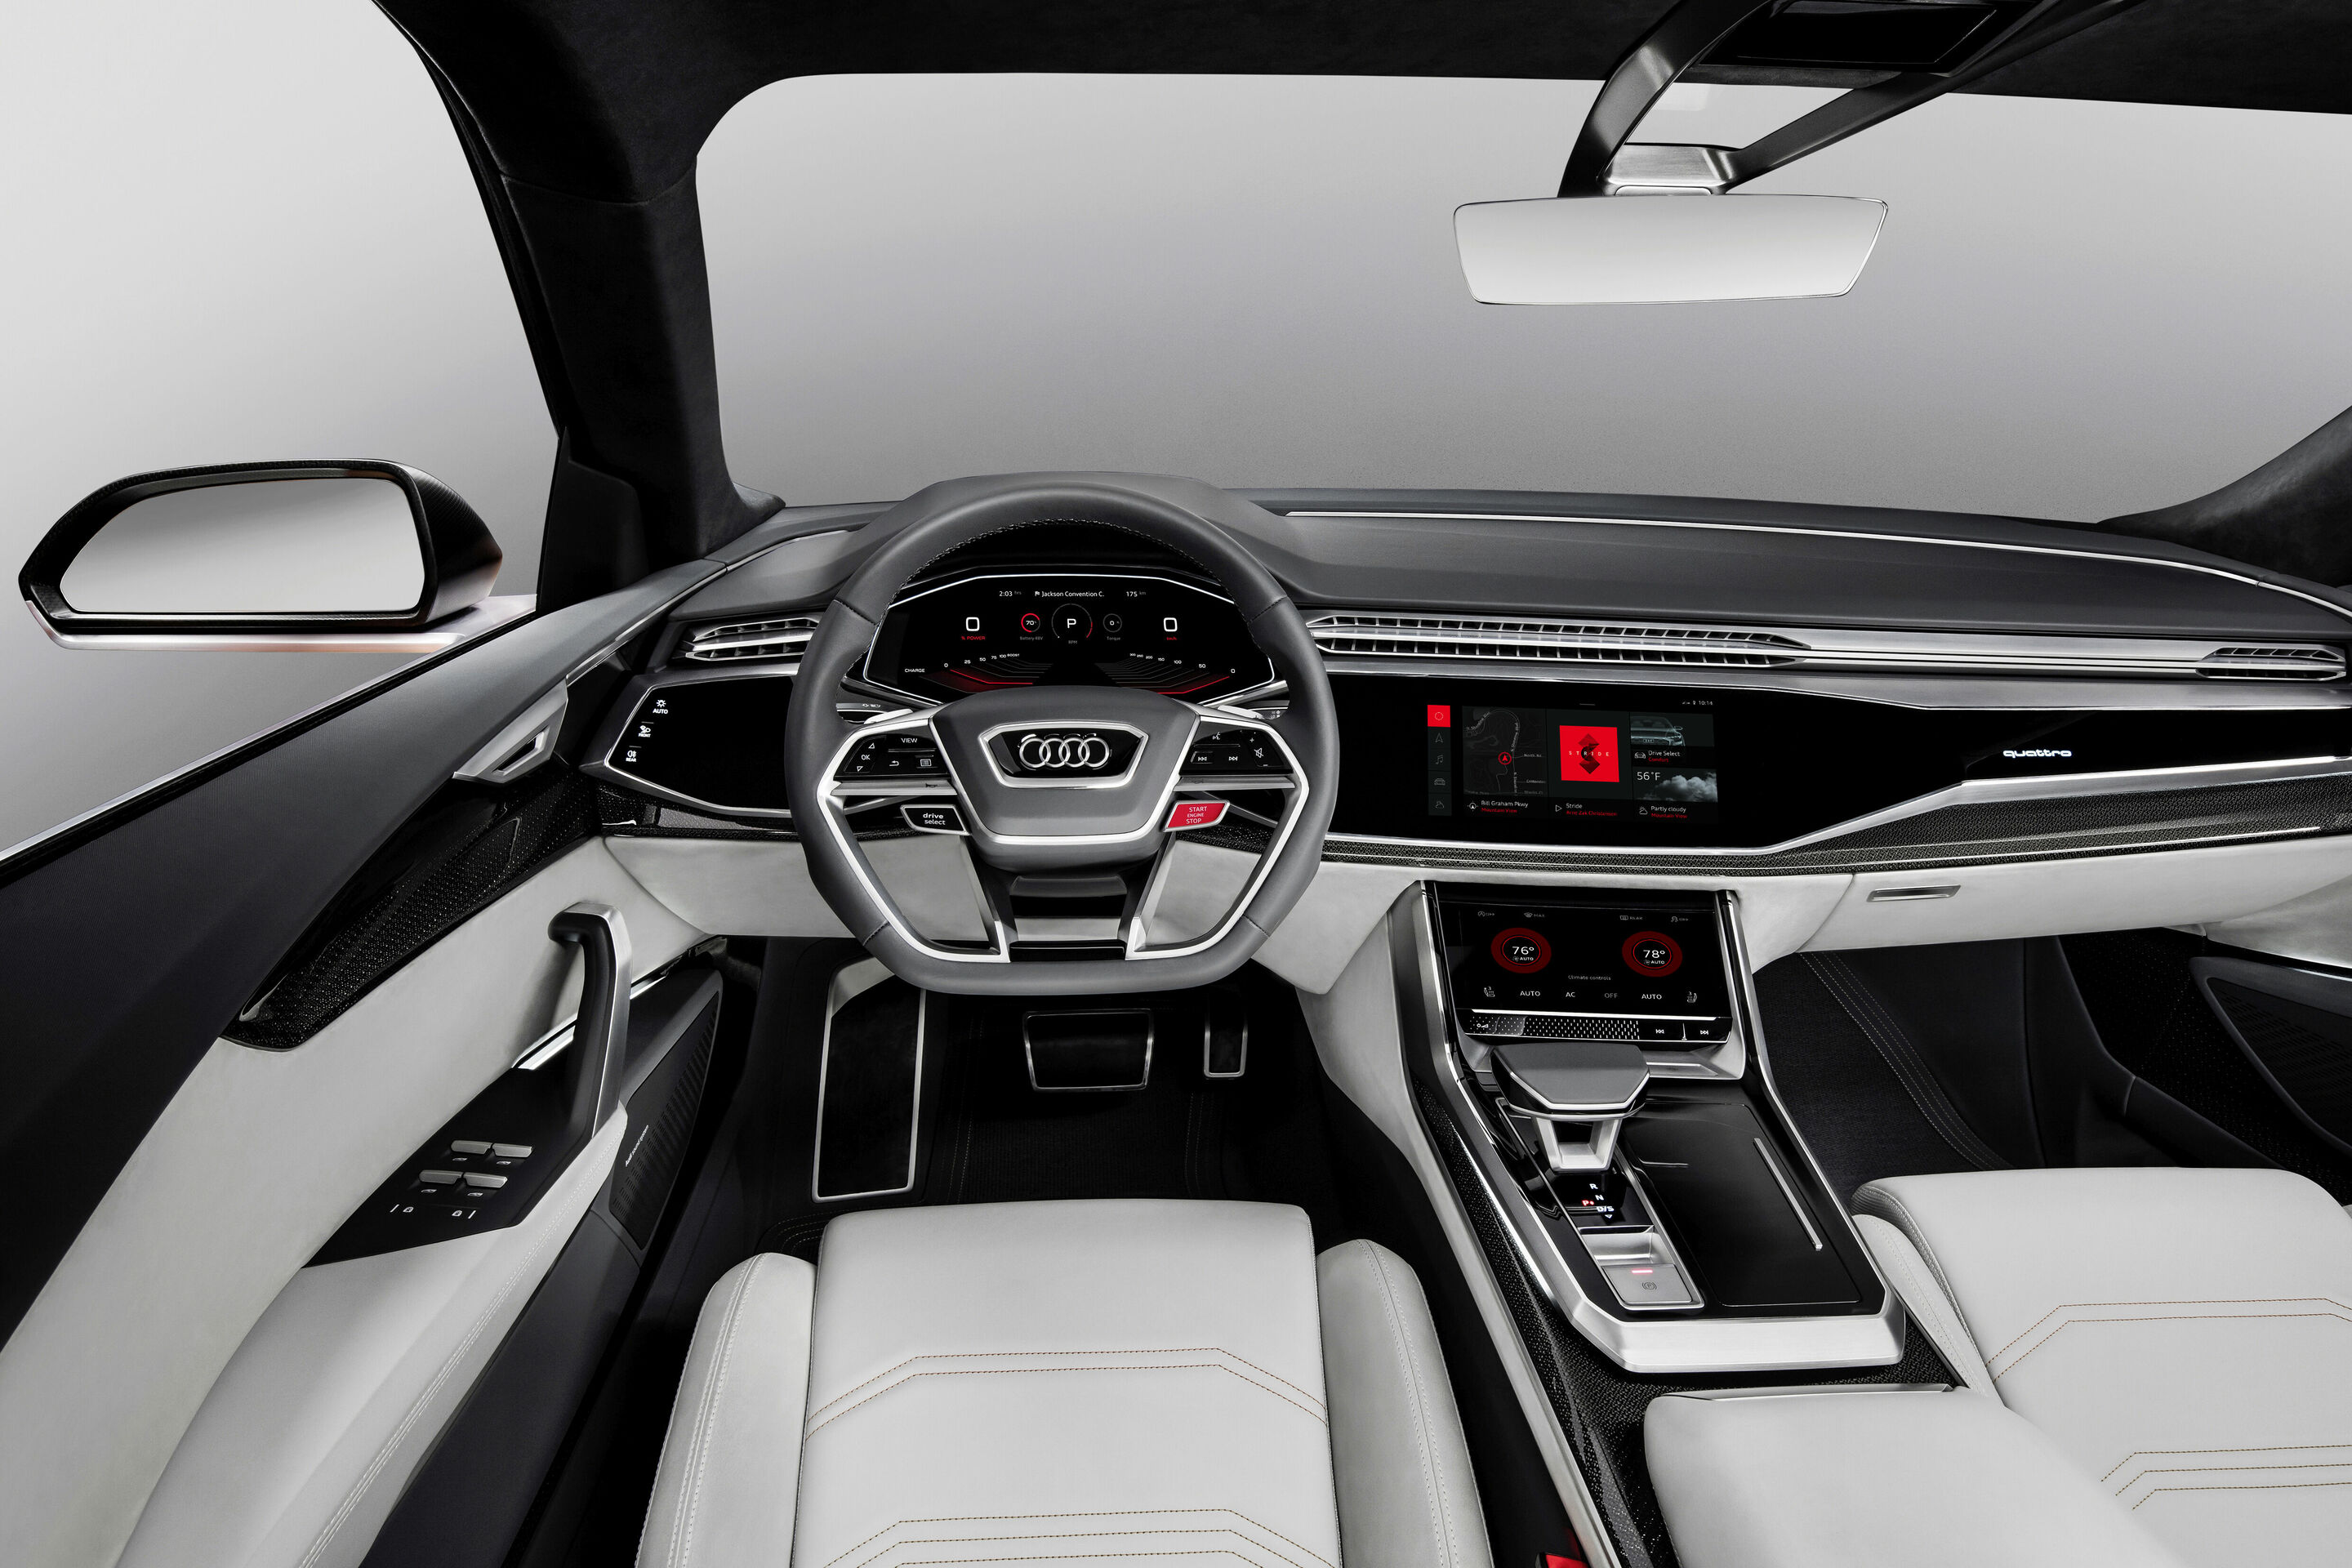 Audi shows integrated Android operating system in Audi Q8 sport concept